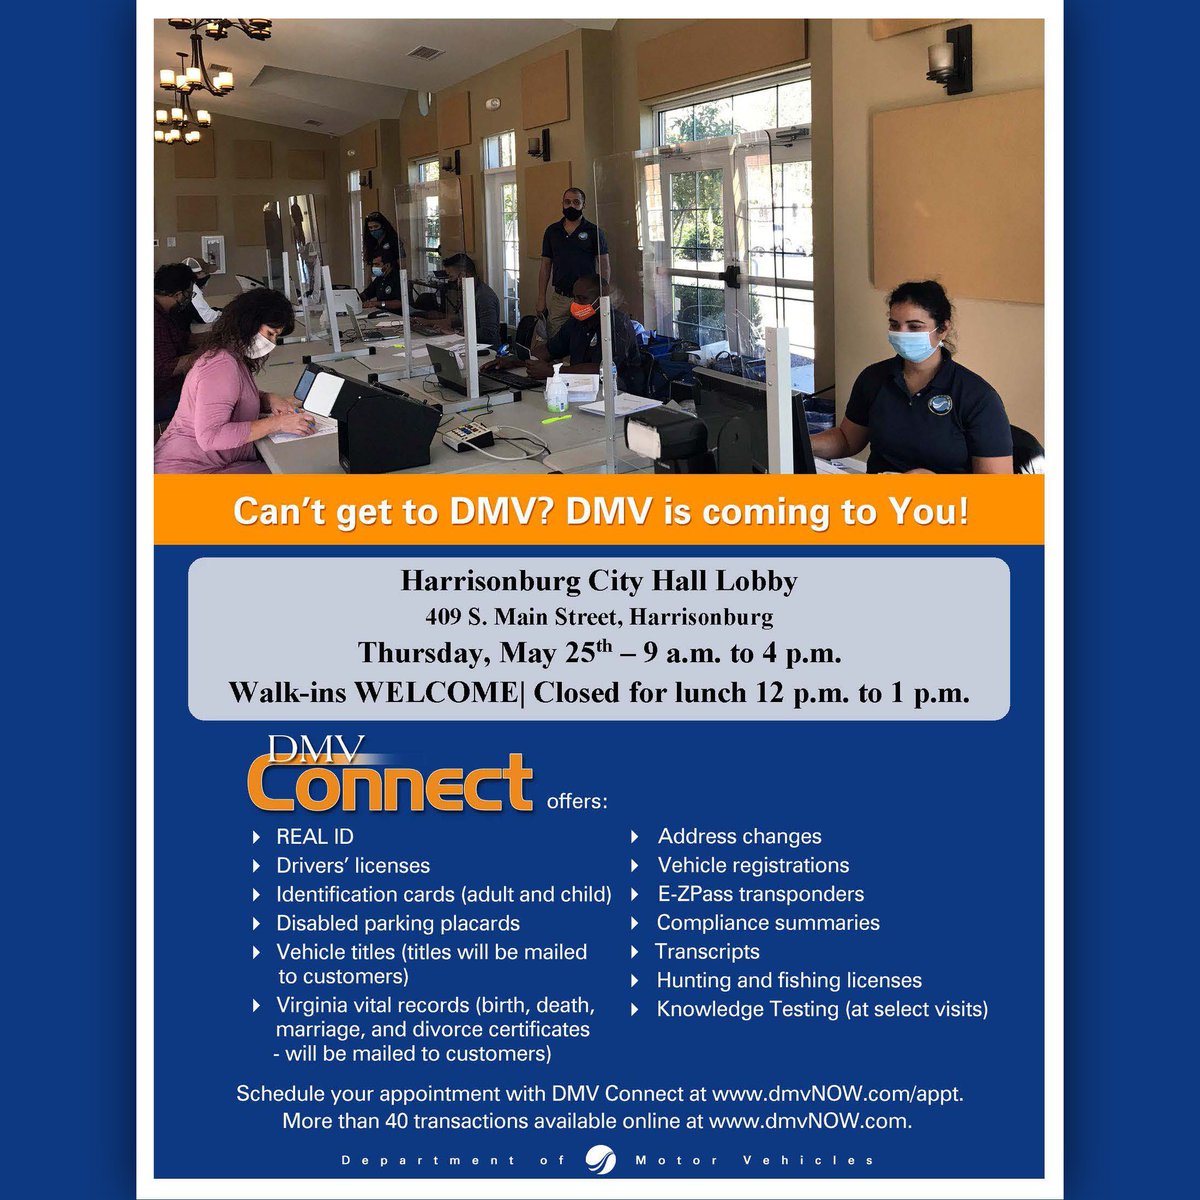 DMV Connect will be in the Harrisonburg City Hall lobby tomorrow, Thursday, May 25 from 9am-4pm.
Walk-ins are welcome.